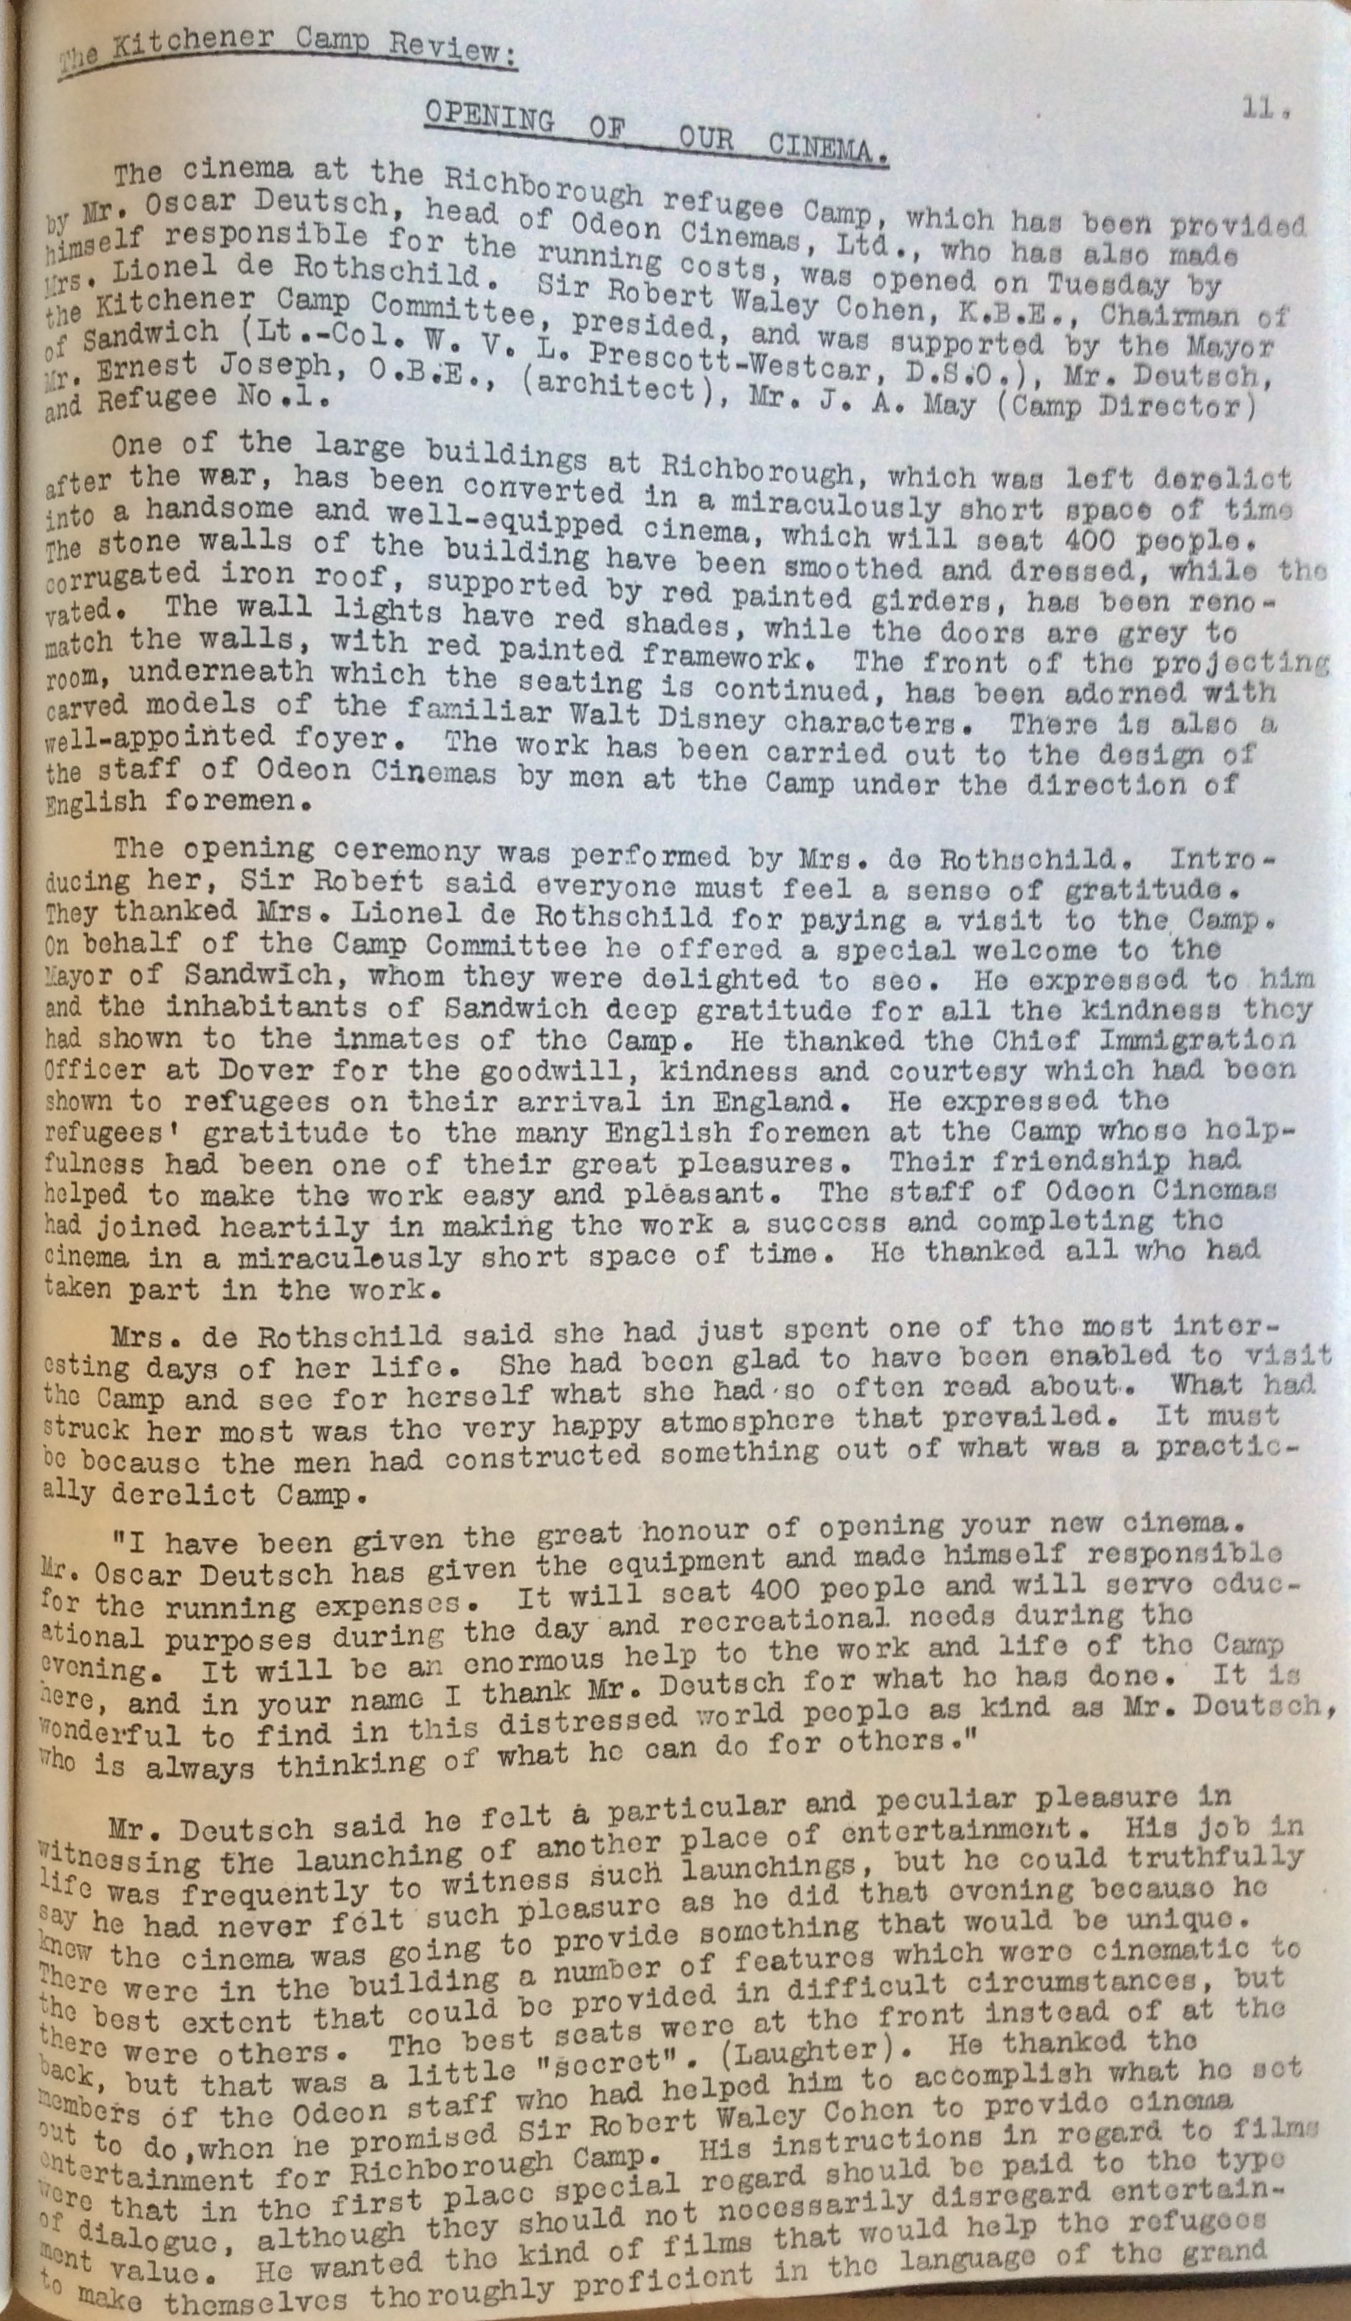 The Kitchener Camp Review, July 1939, No. 5, page 11